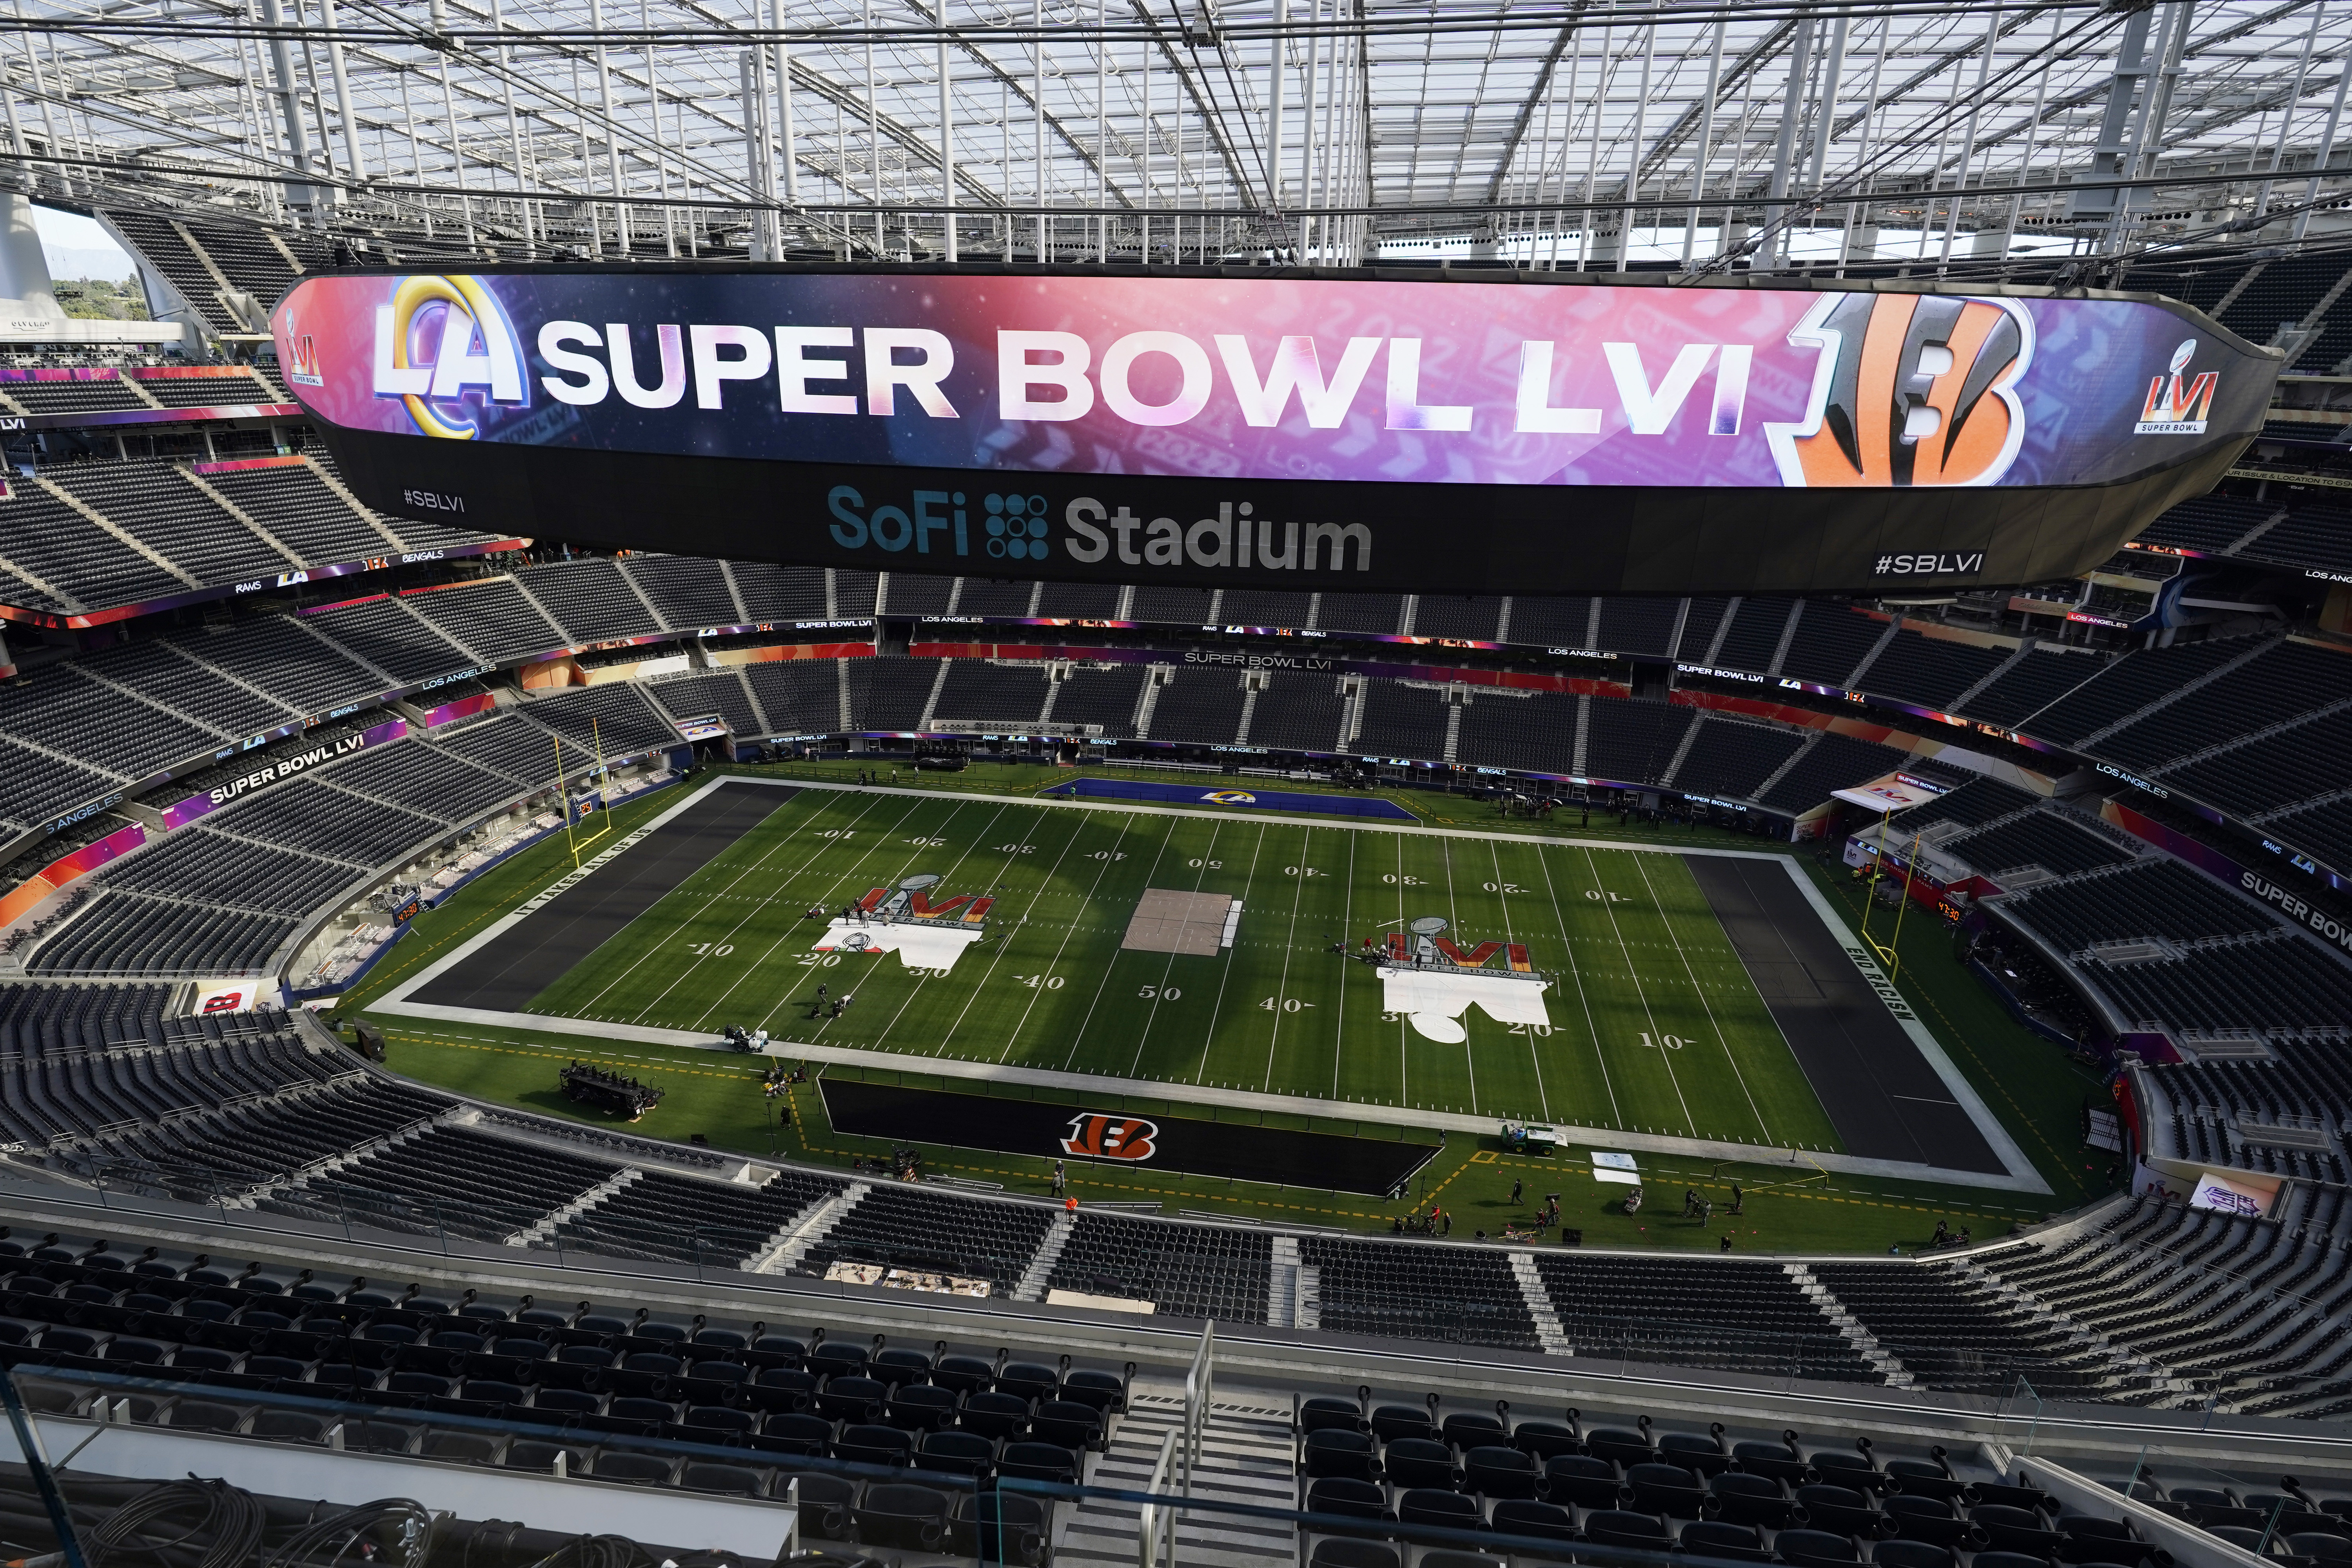 bengals odds to win super bowl